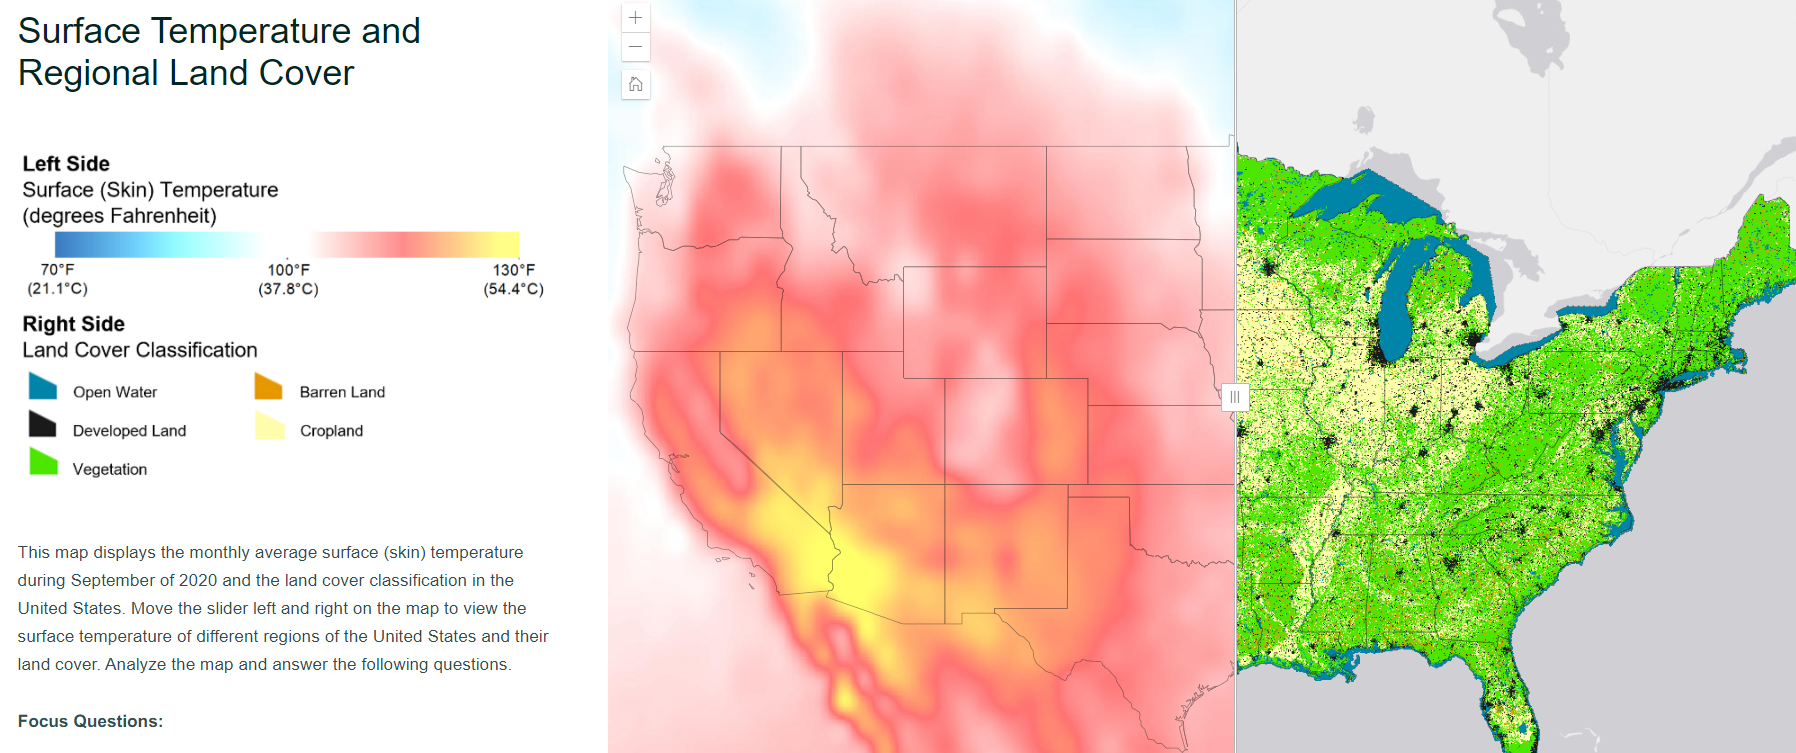 Surface temperature and land cover classification